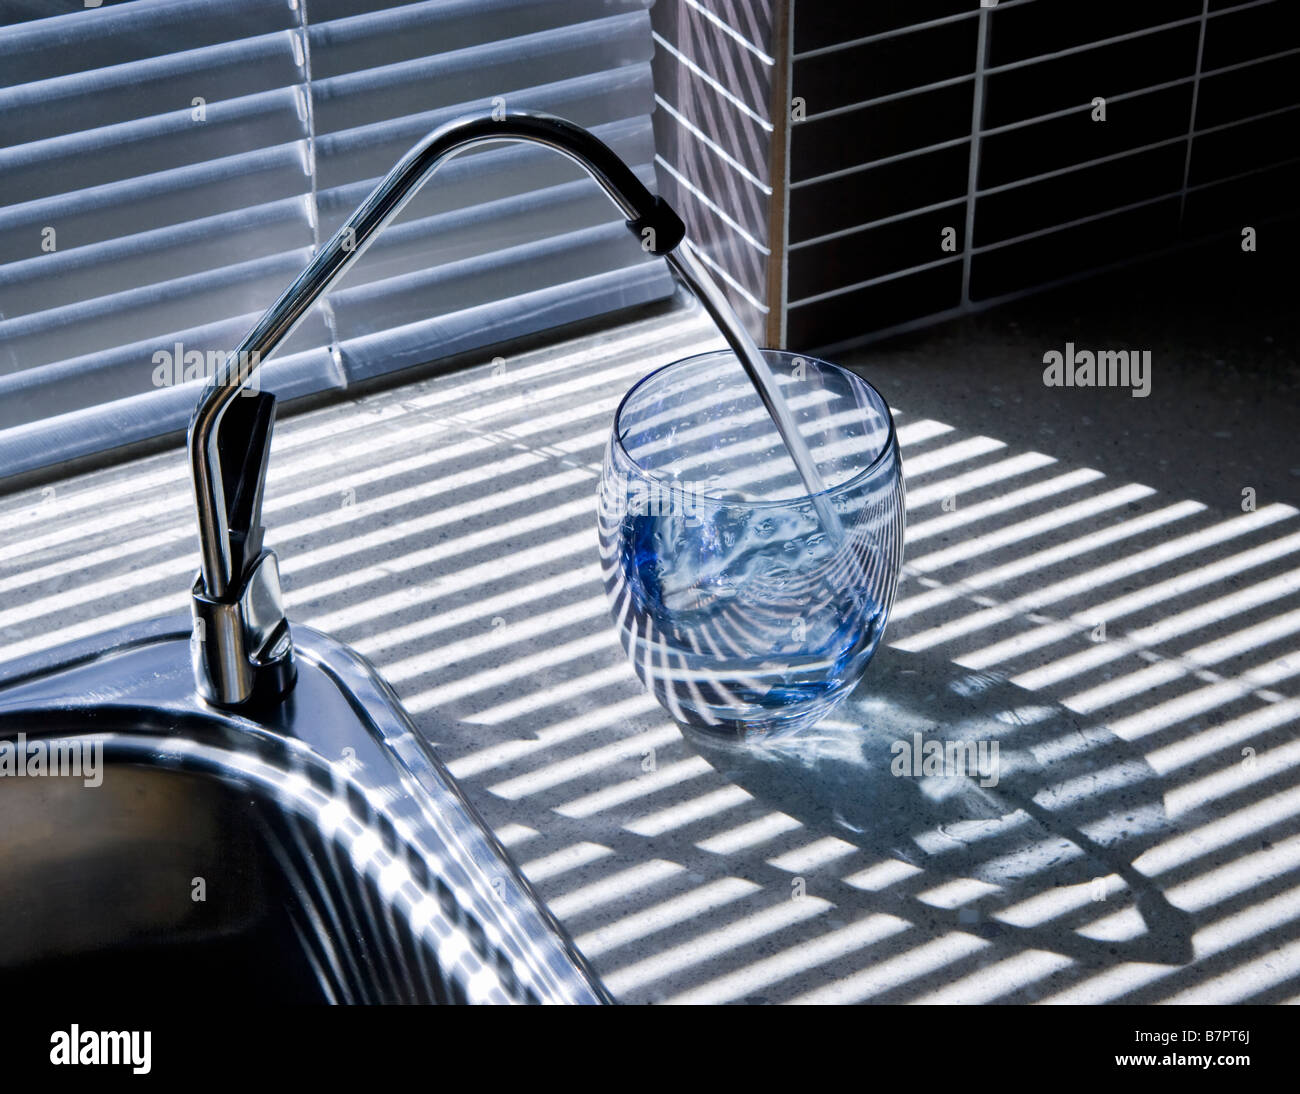 https://c8.alamy.com/comp/B7PT6J/filtered-water-pouring-into-a-glass-from-a-under-sink-water-filter-B7PT6J.jpg